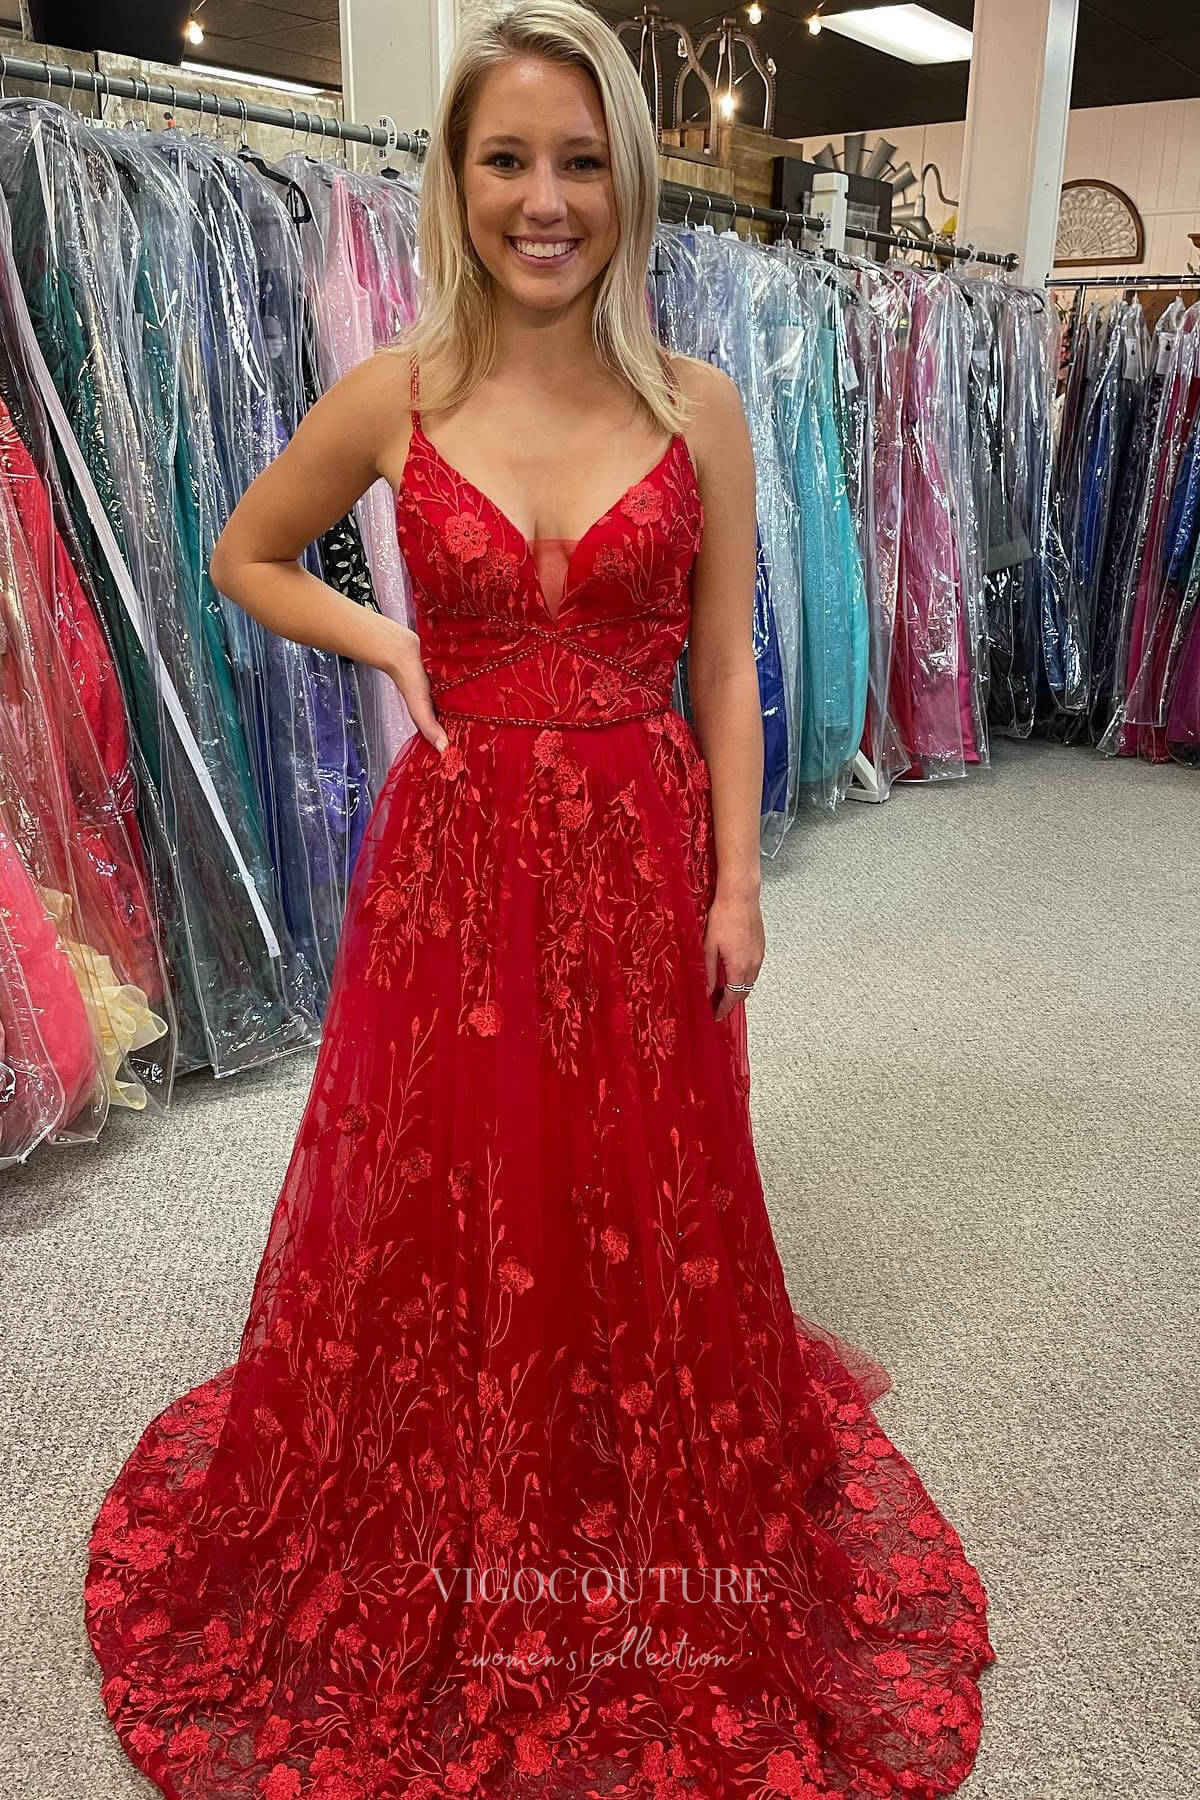 Radiant Red Lace Applique Sparkly Tulle Prom Dress with Spaghetti Straps and V-Neckline 22202-Prom Dresses-vigocouture-Red-US2-vigocouture